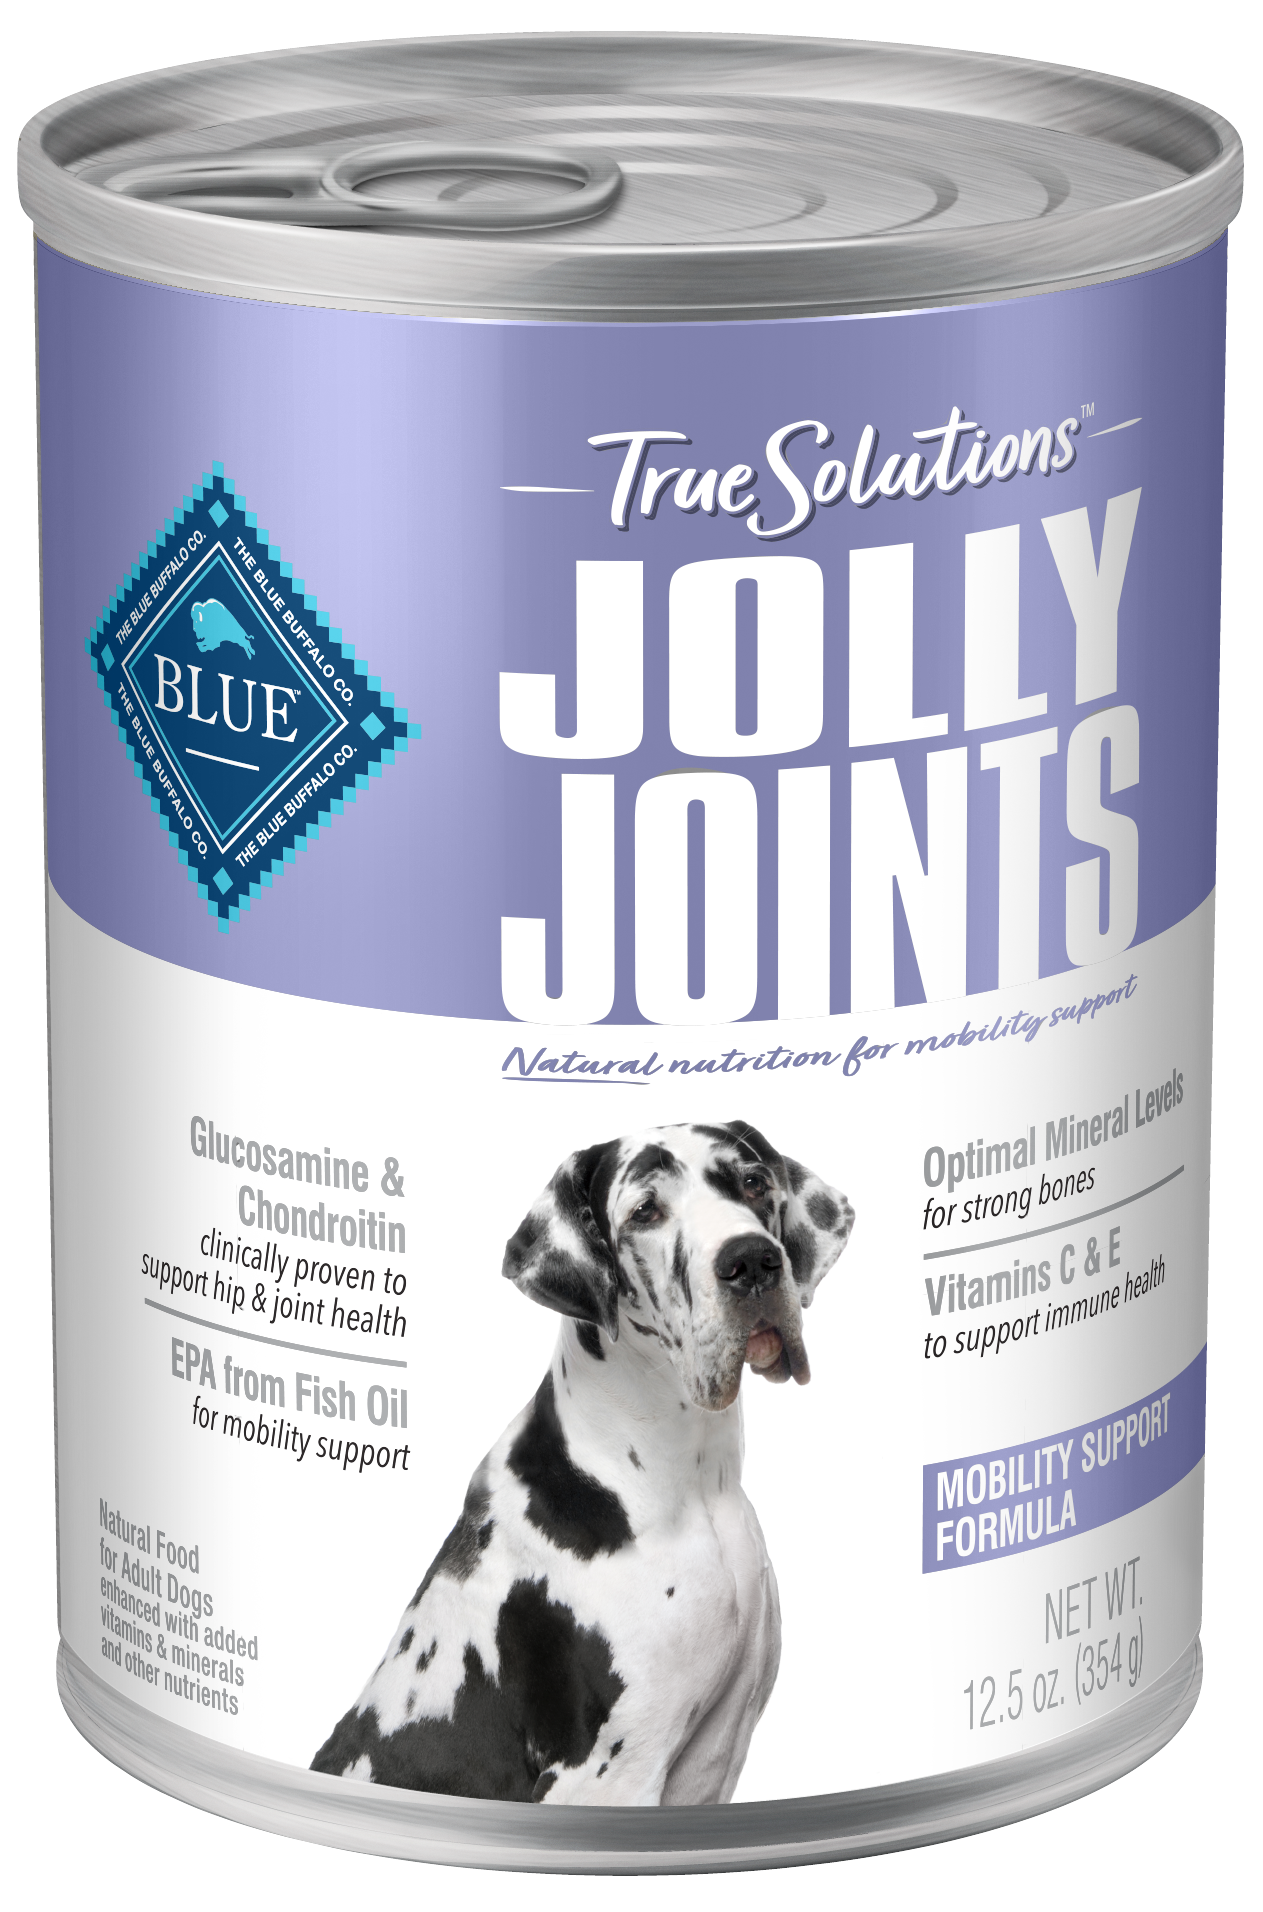 Blue Buffalo True Solutions Jolly Joints Natural Mobility Support Adult Wet Dog Food, Chicken 12.5-oz cans, Case of 12